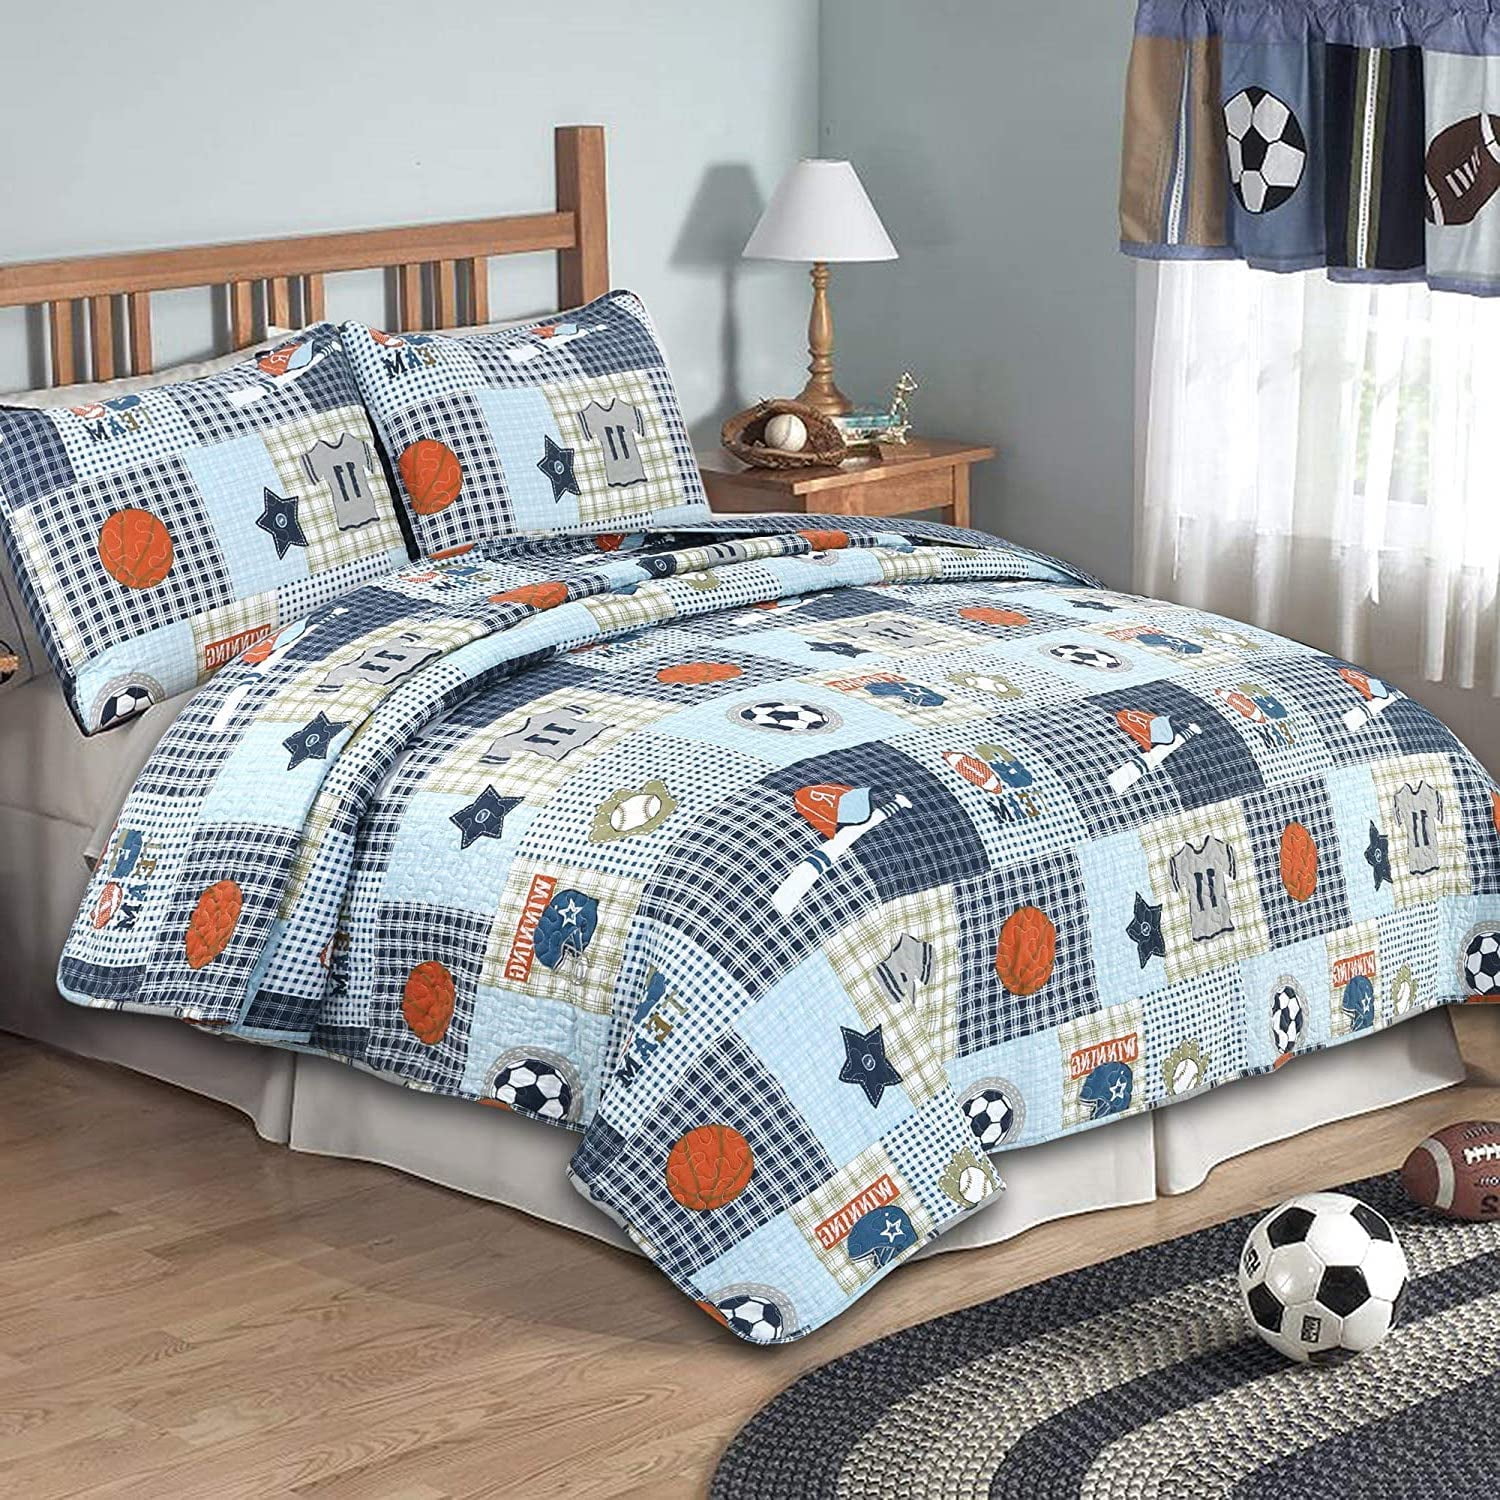 Bowling Green Falcons 02 Quilt Blanket Ncaa Football Sports Bedding Family Graduating Gift For Him Her Father's Day